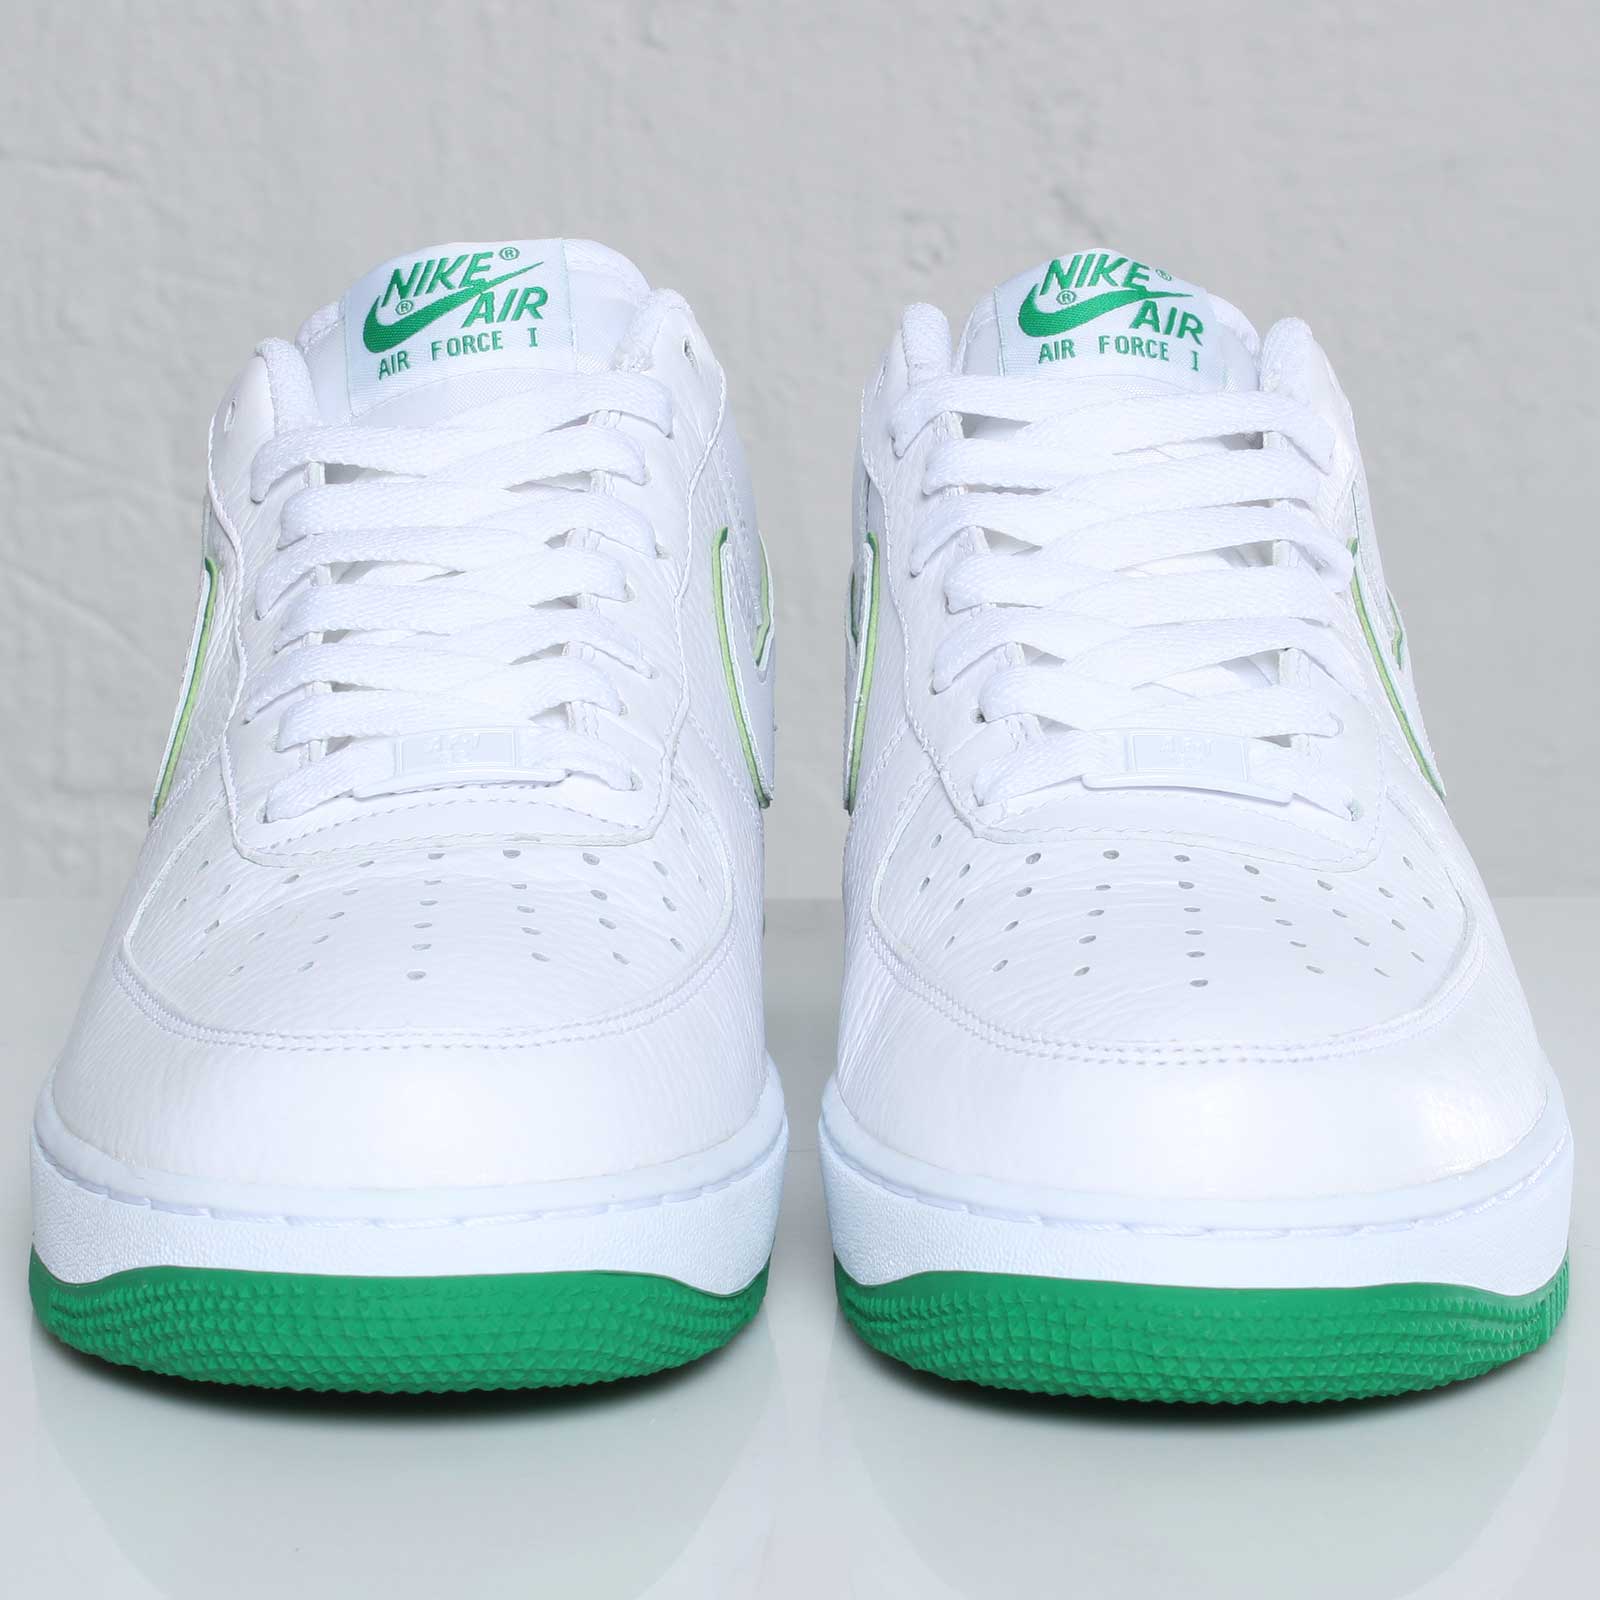 Nike Air Force 1 Low 'White/Court Green' - Available Early